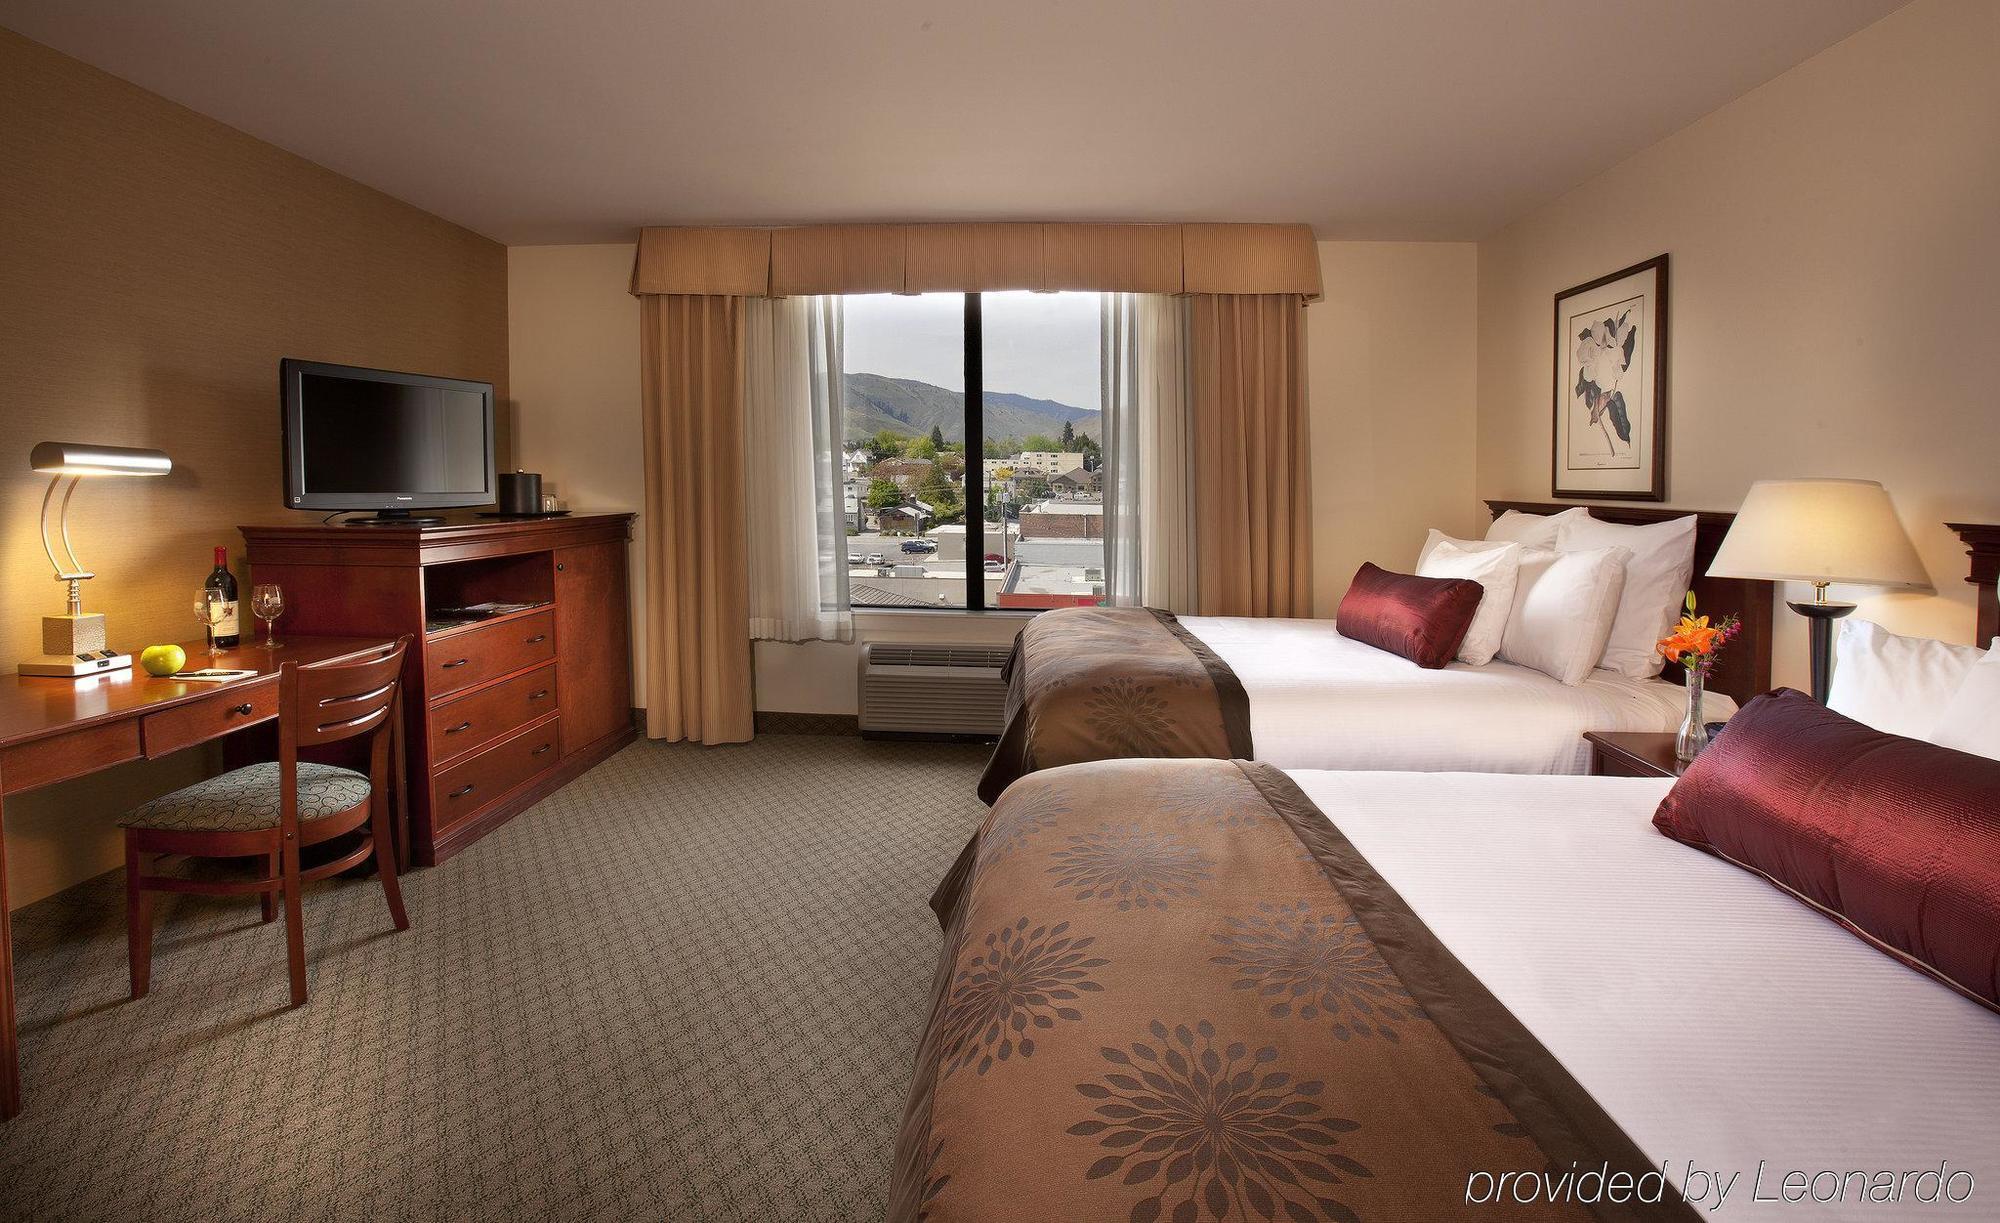 Coast Wenatchee Center Hotel (Adults Only) Room photo